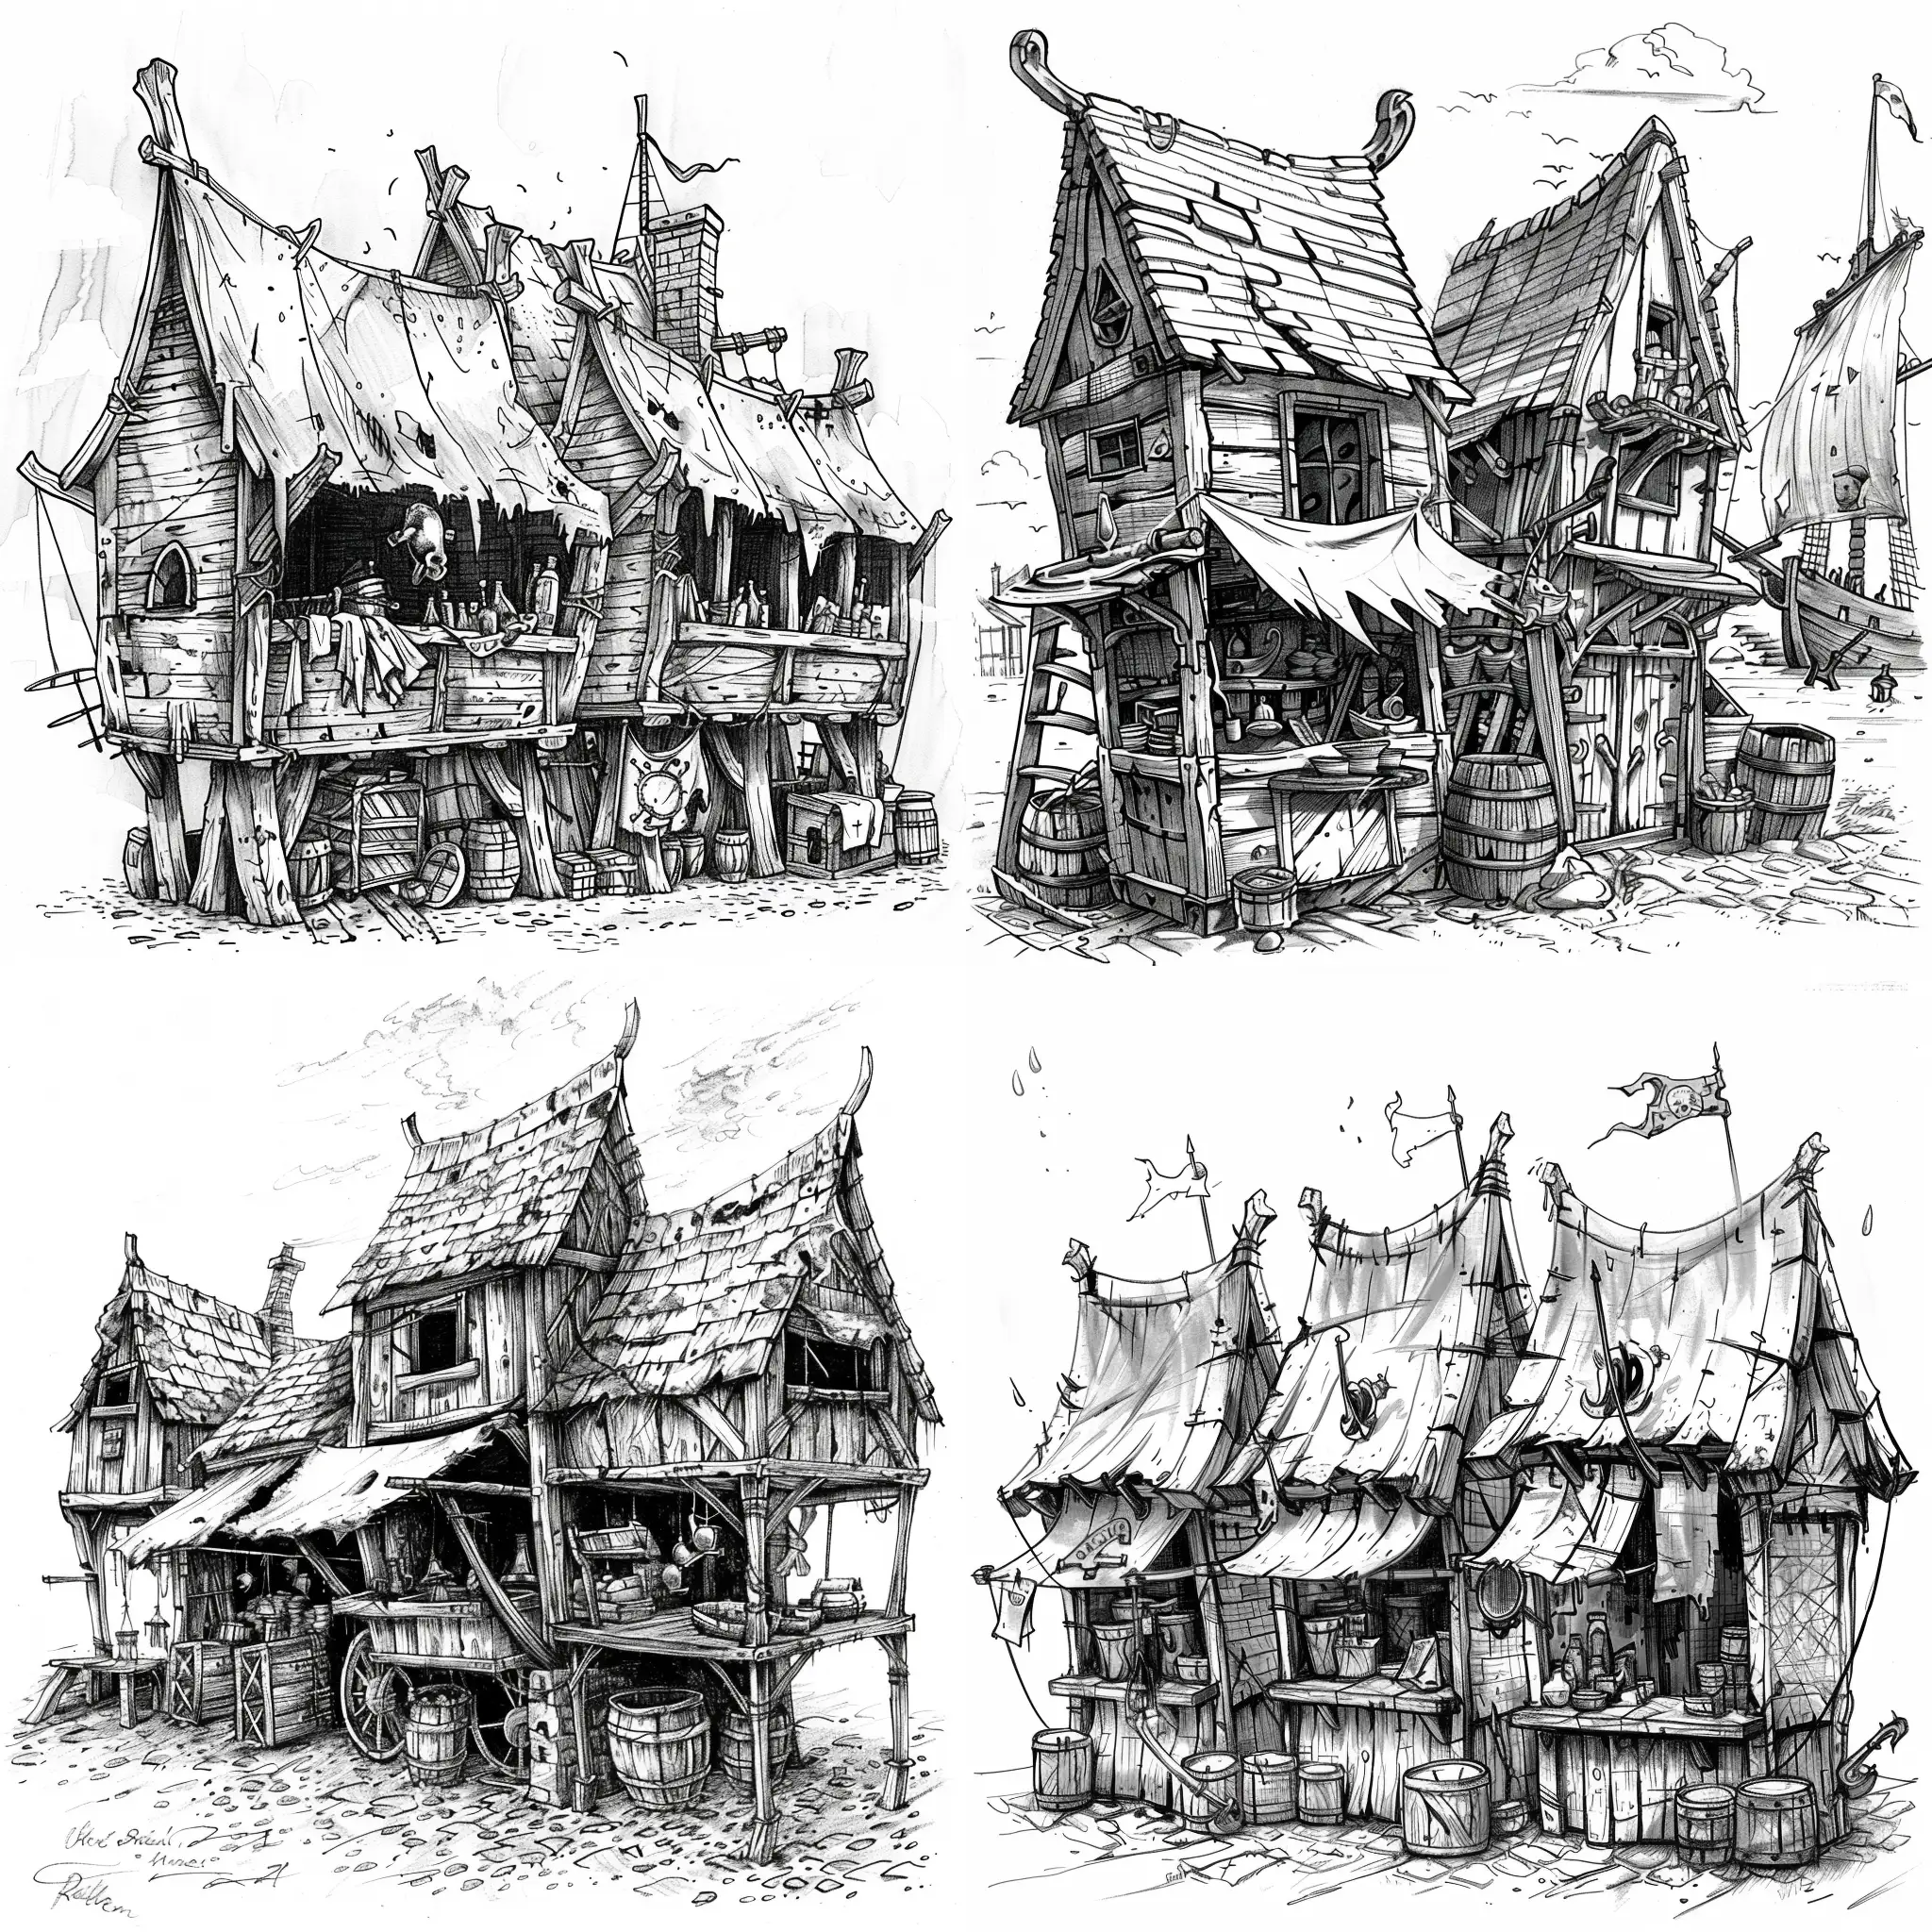 children's book illustration in black and white, basic sketch of 3 medieval market stalls or very old shop fronts in an old seaside village, the stall could be made from parts of an old wooden pirate ship, in the style of chris riddell's art